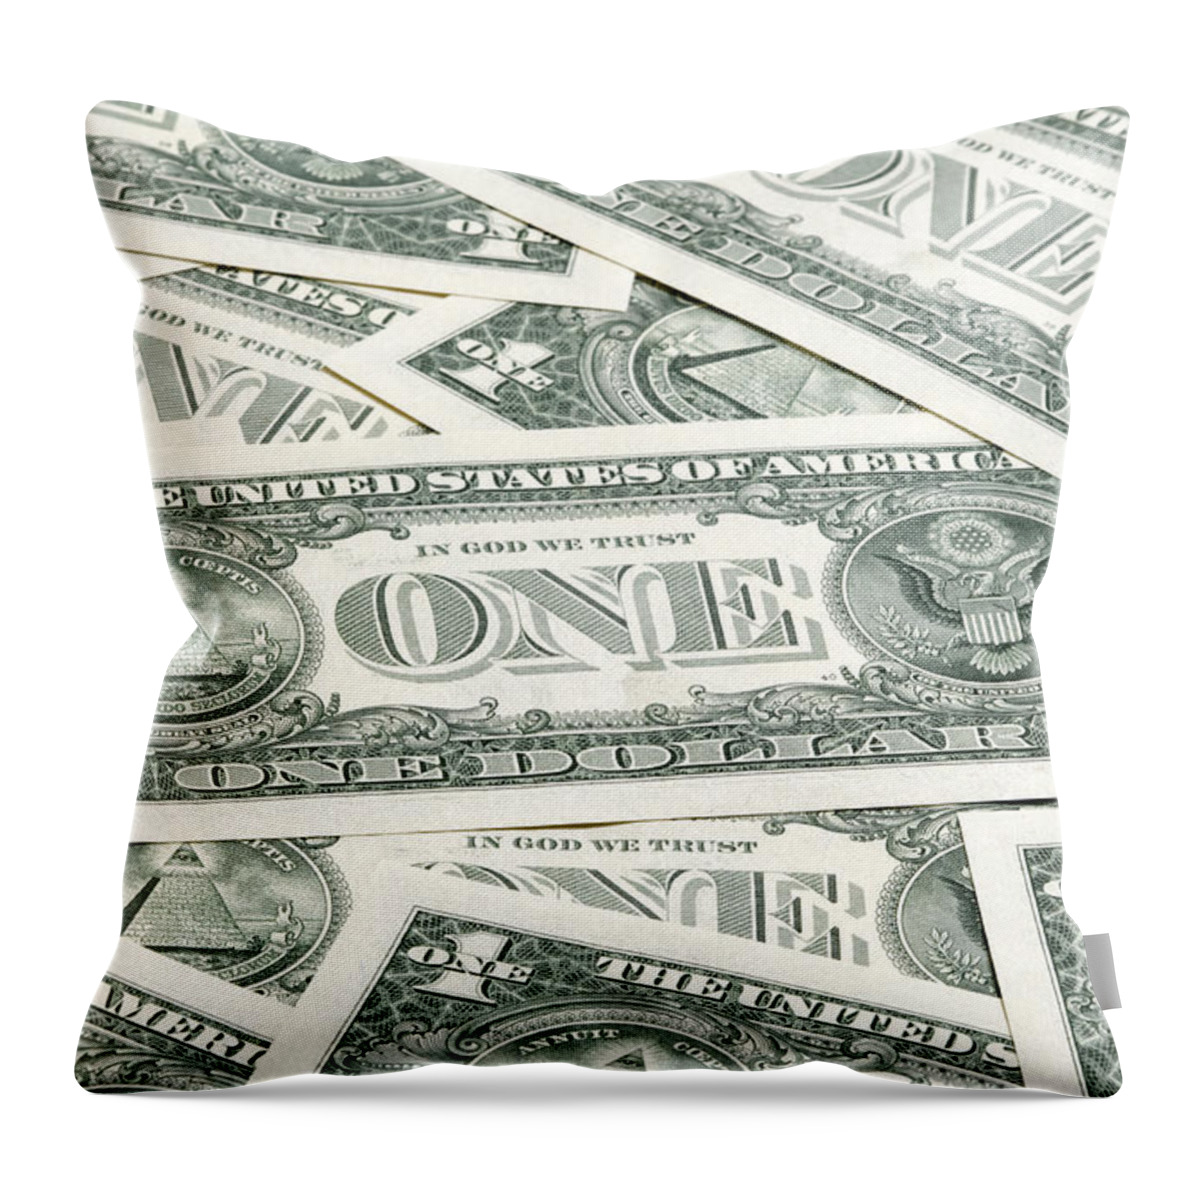 America Throw Pillow featuring the photograph Carpet Of One Dollar Bills by Lee Avison